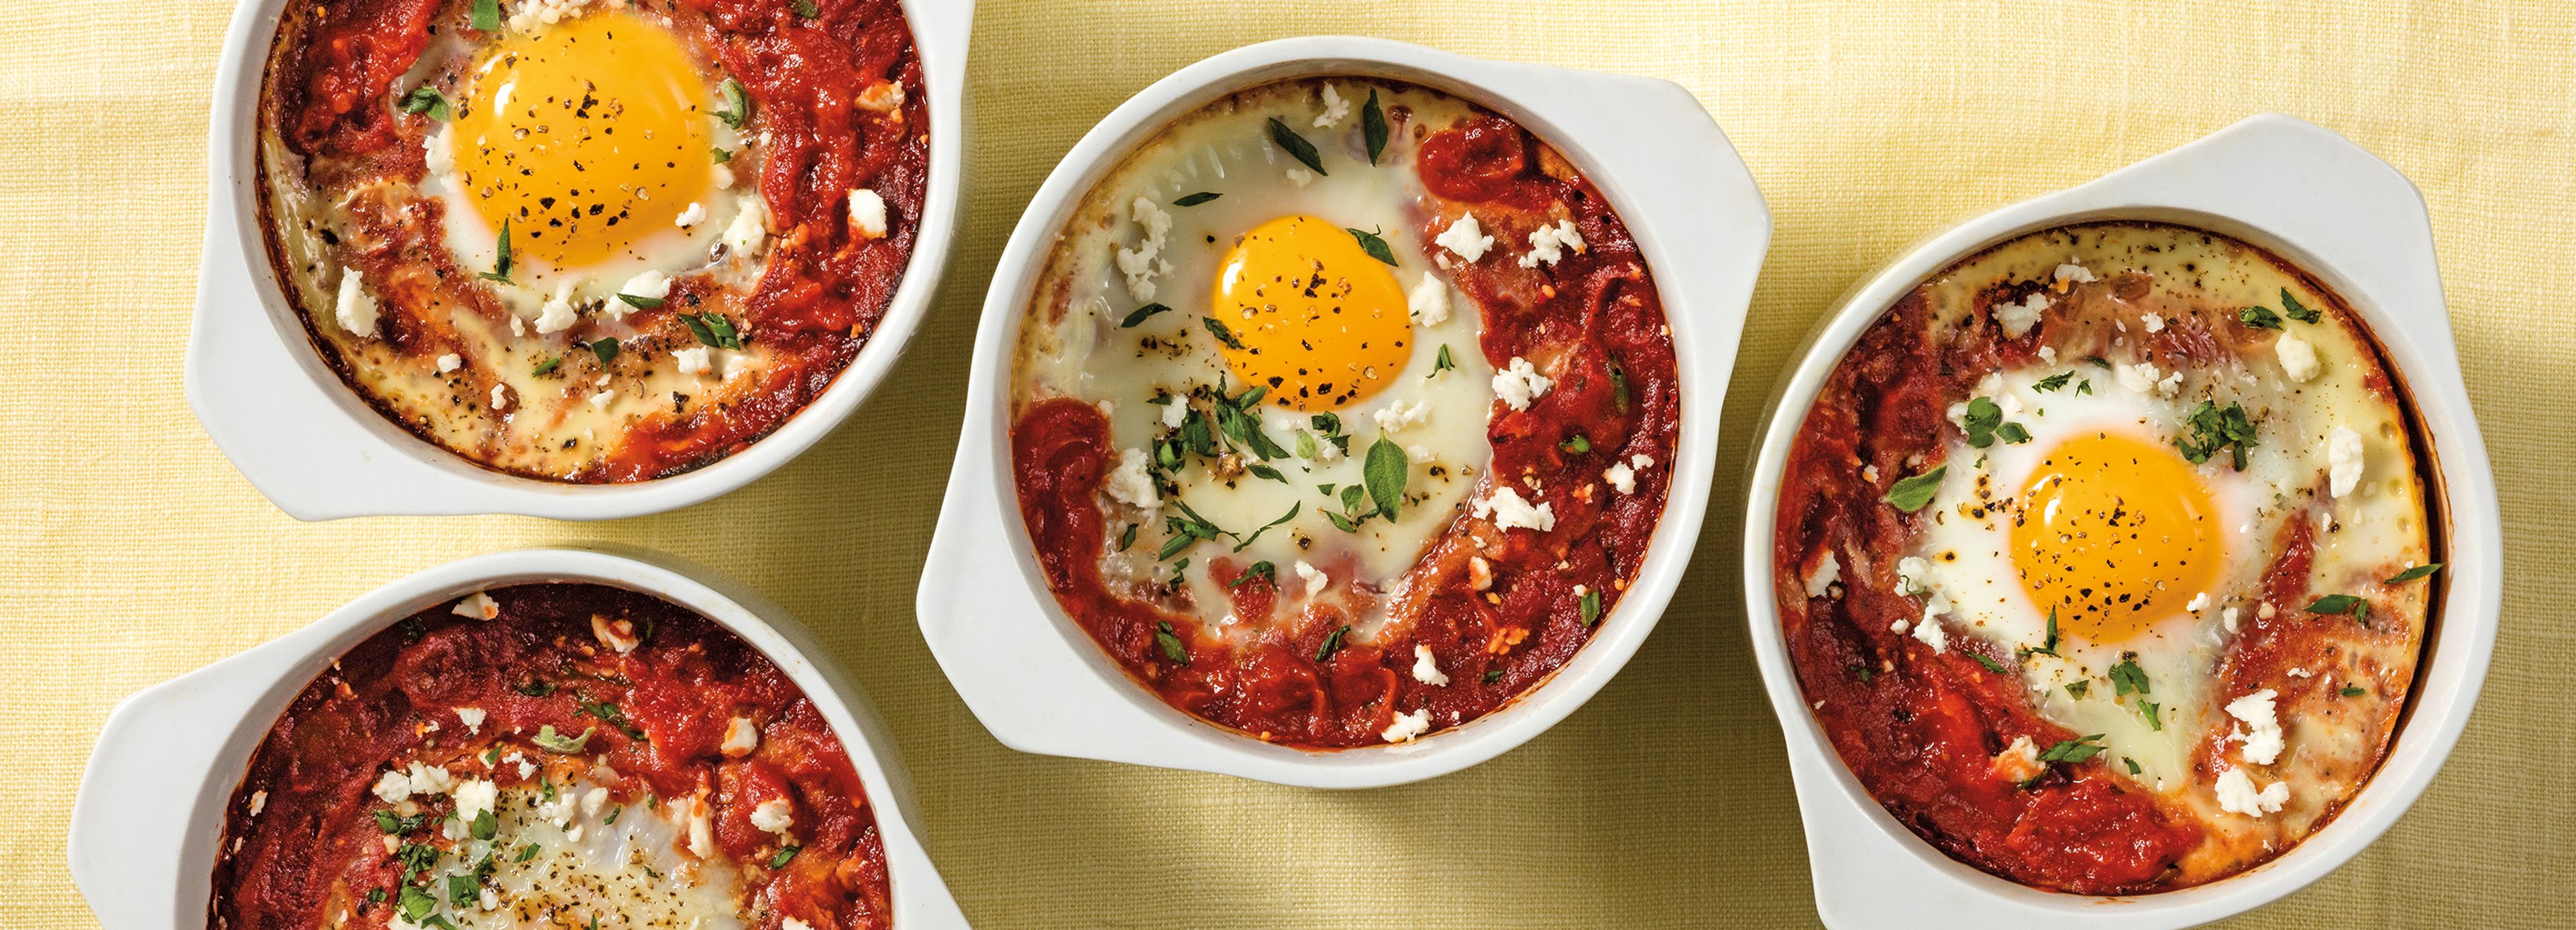 Baked Eggs With Tomato Sauce